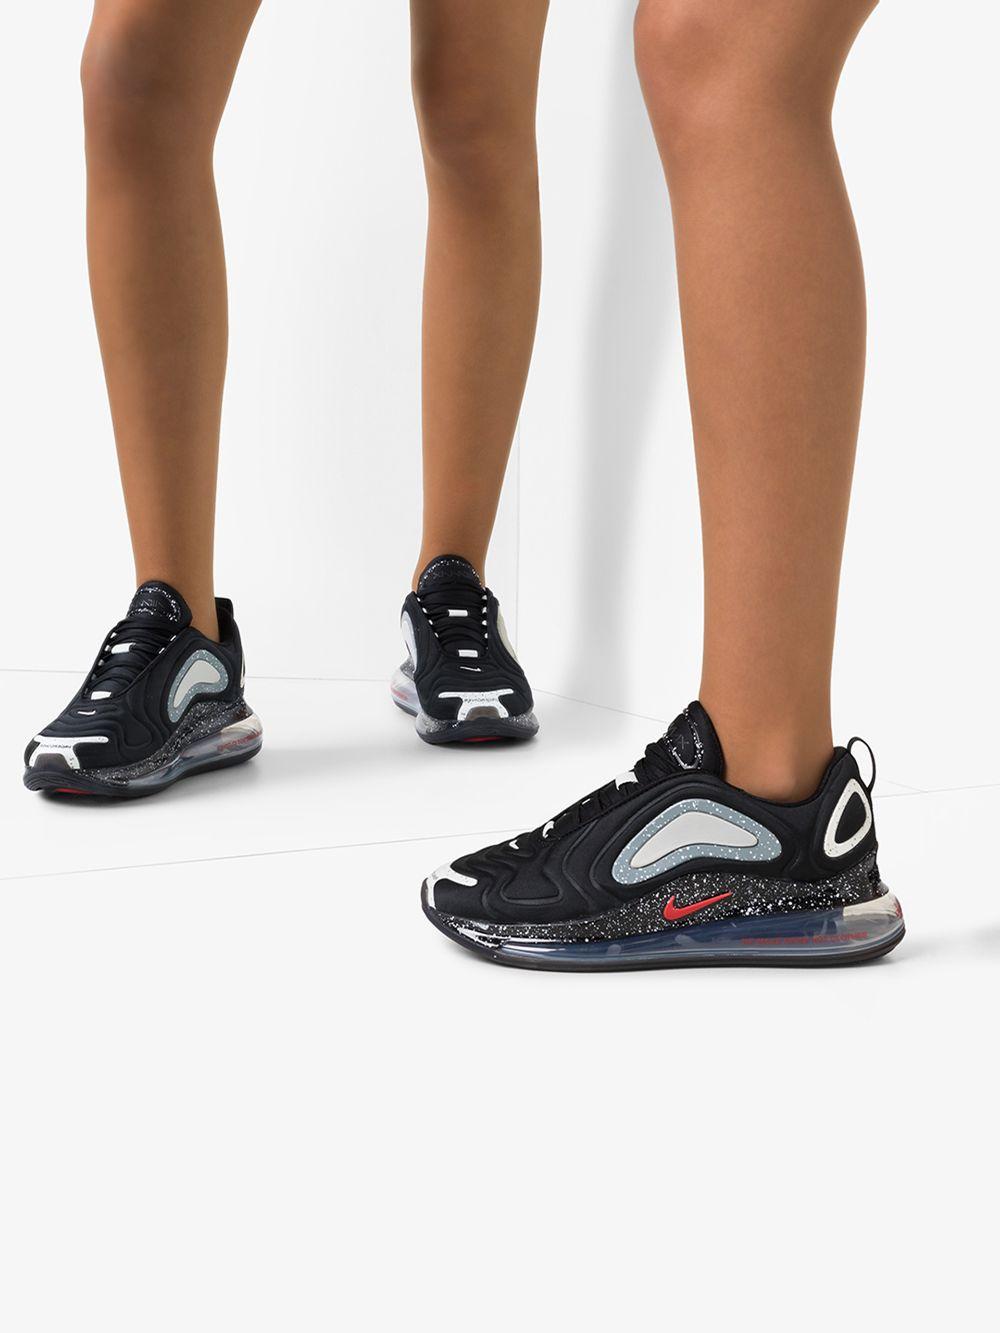 nike x undercover air max 720 shoe